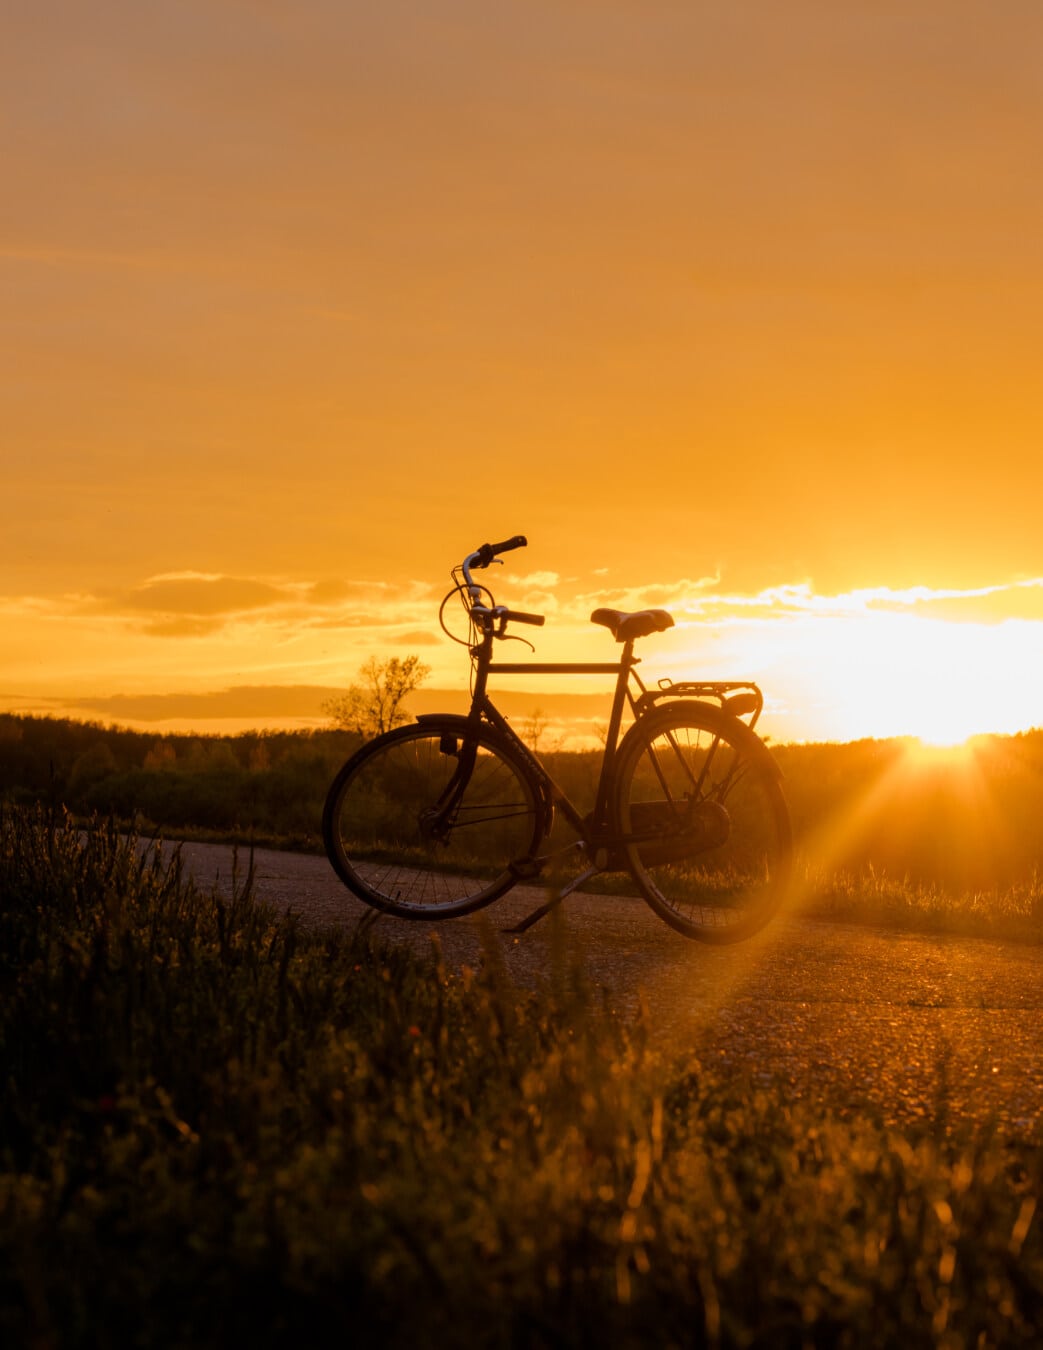 sunrays, sunset, backlight, bicycle, silhouette, afternoon, landscape, dawn, sun, bike